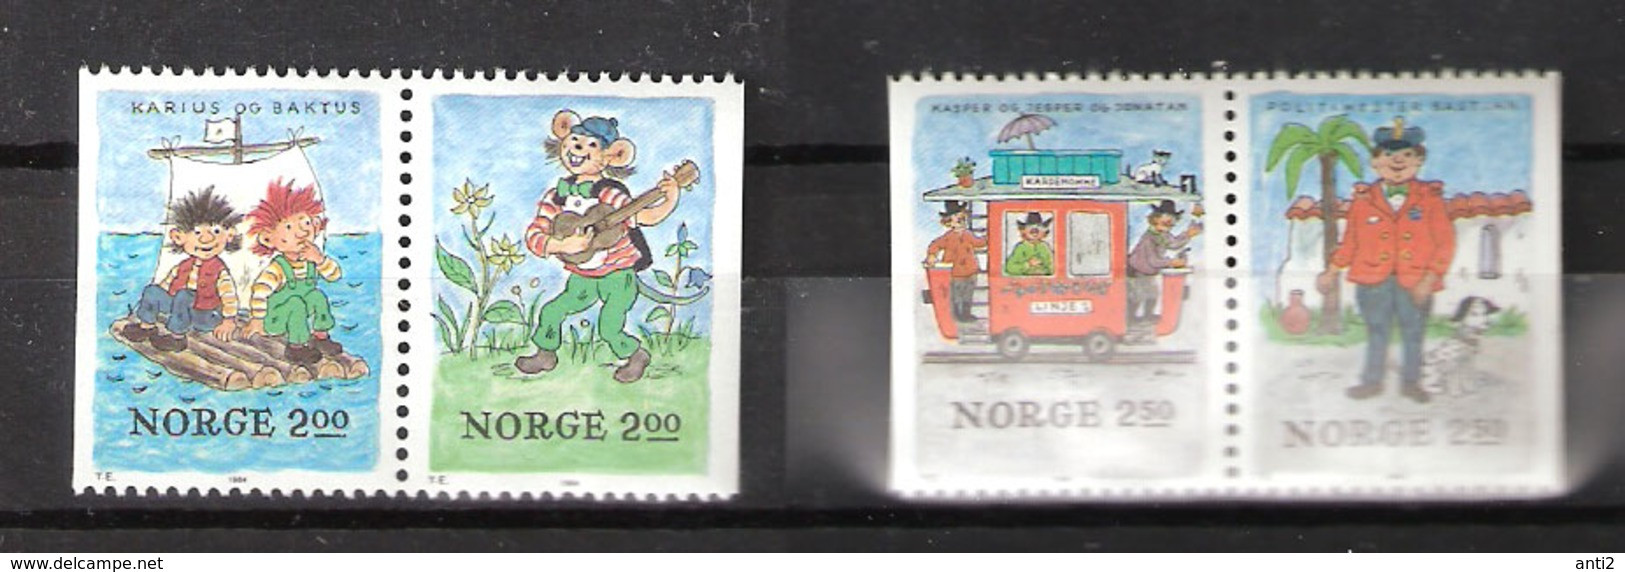 Norge Norway 1984  Christmas: Children Books Illustrations, Kardemomme By / Karius And Baktus   Mi 914-917, MNH(**) - Unused Stamps